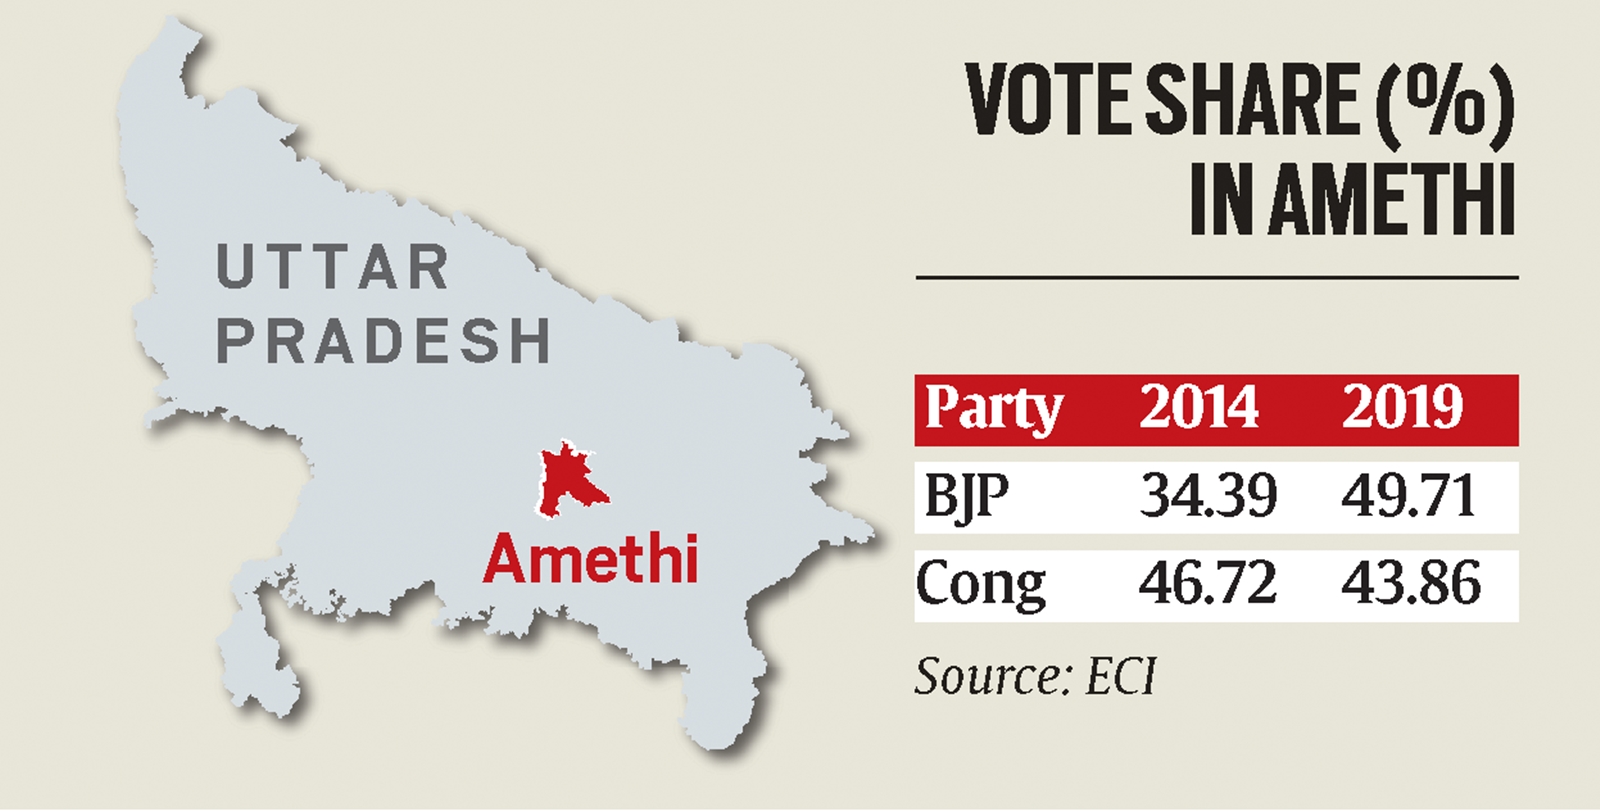 Vote shares in the Amethi Lok Sabha constituency. 